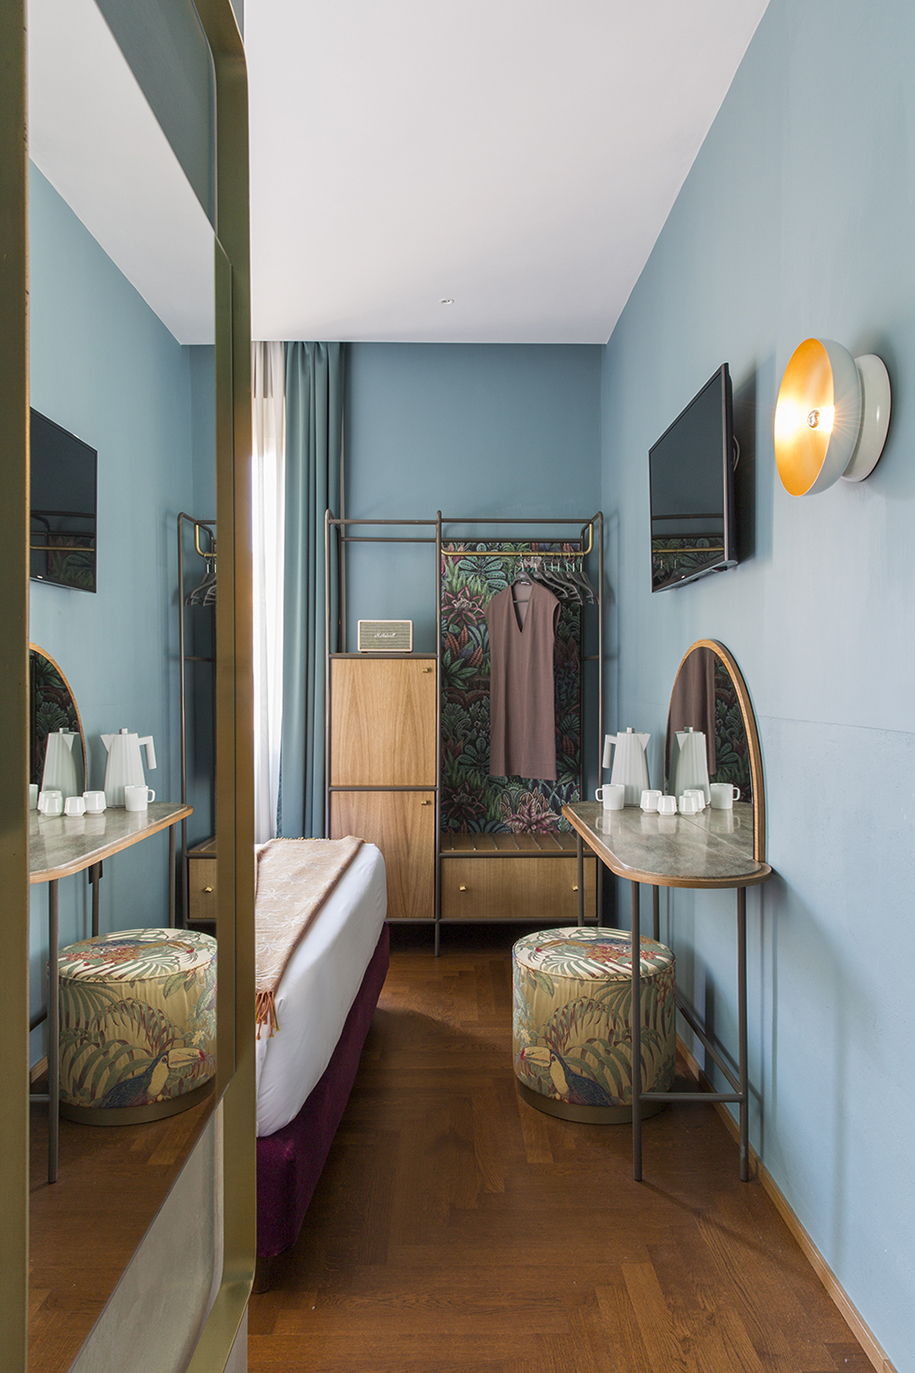 Archisearch Condominio Monti redefines hospitality _ Home from home at Rome’s newest boutique hotel